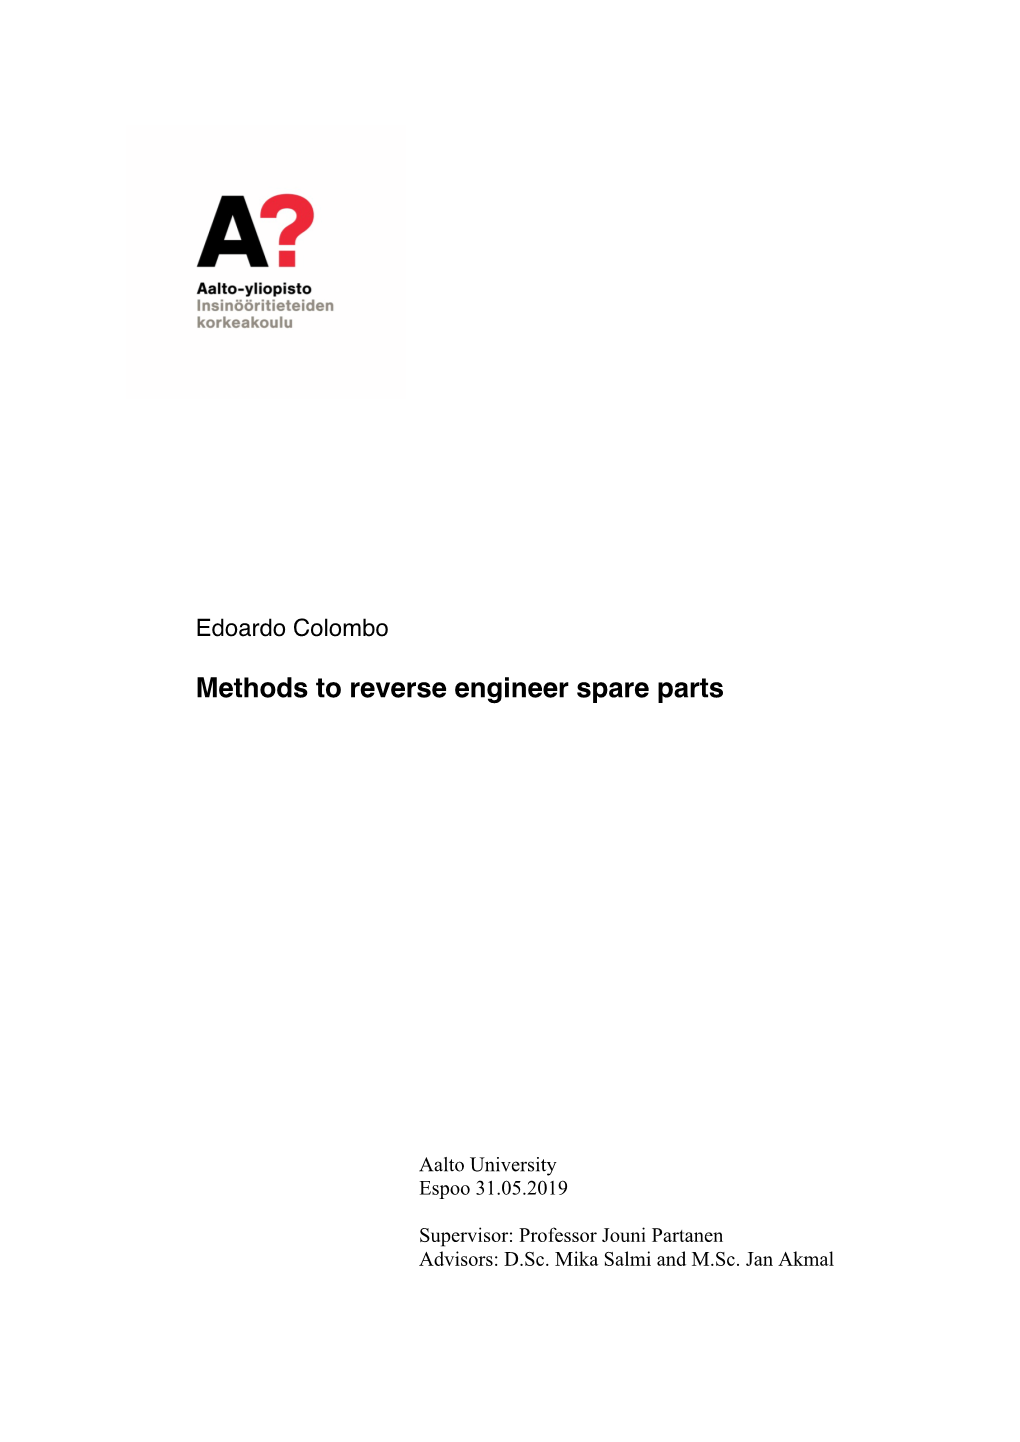 Methods to Reverse Engineer Spare Parts